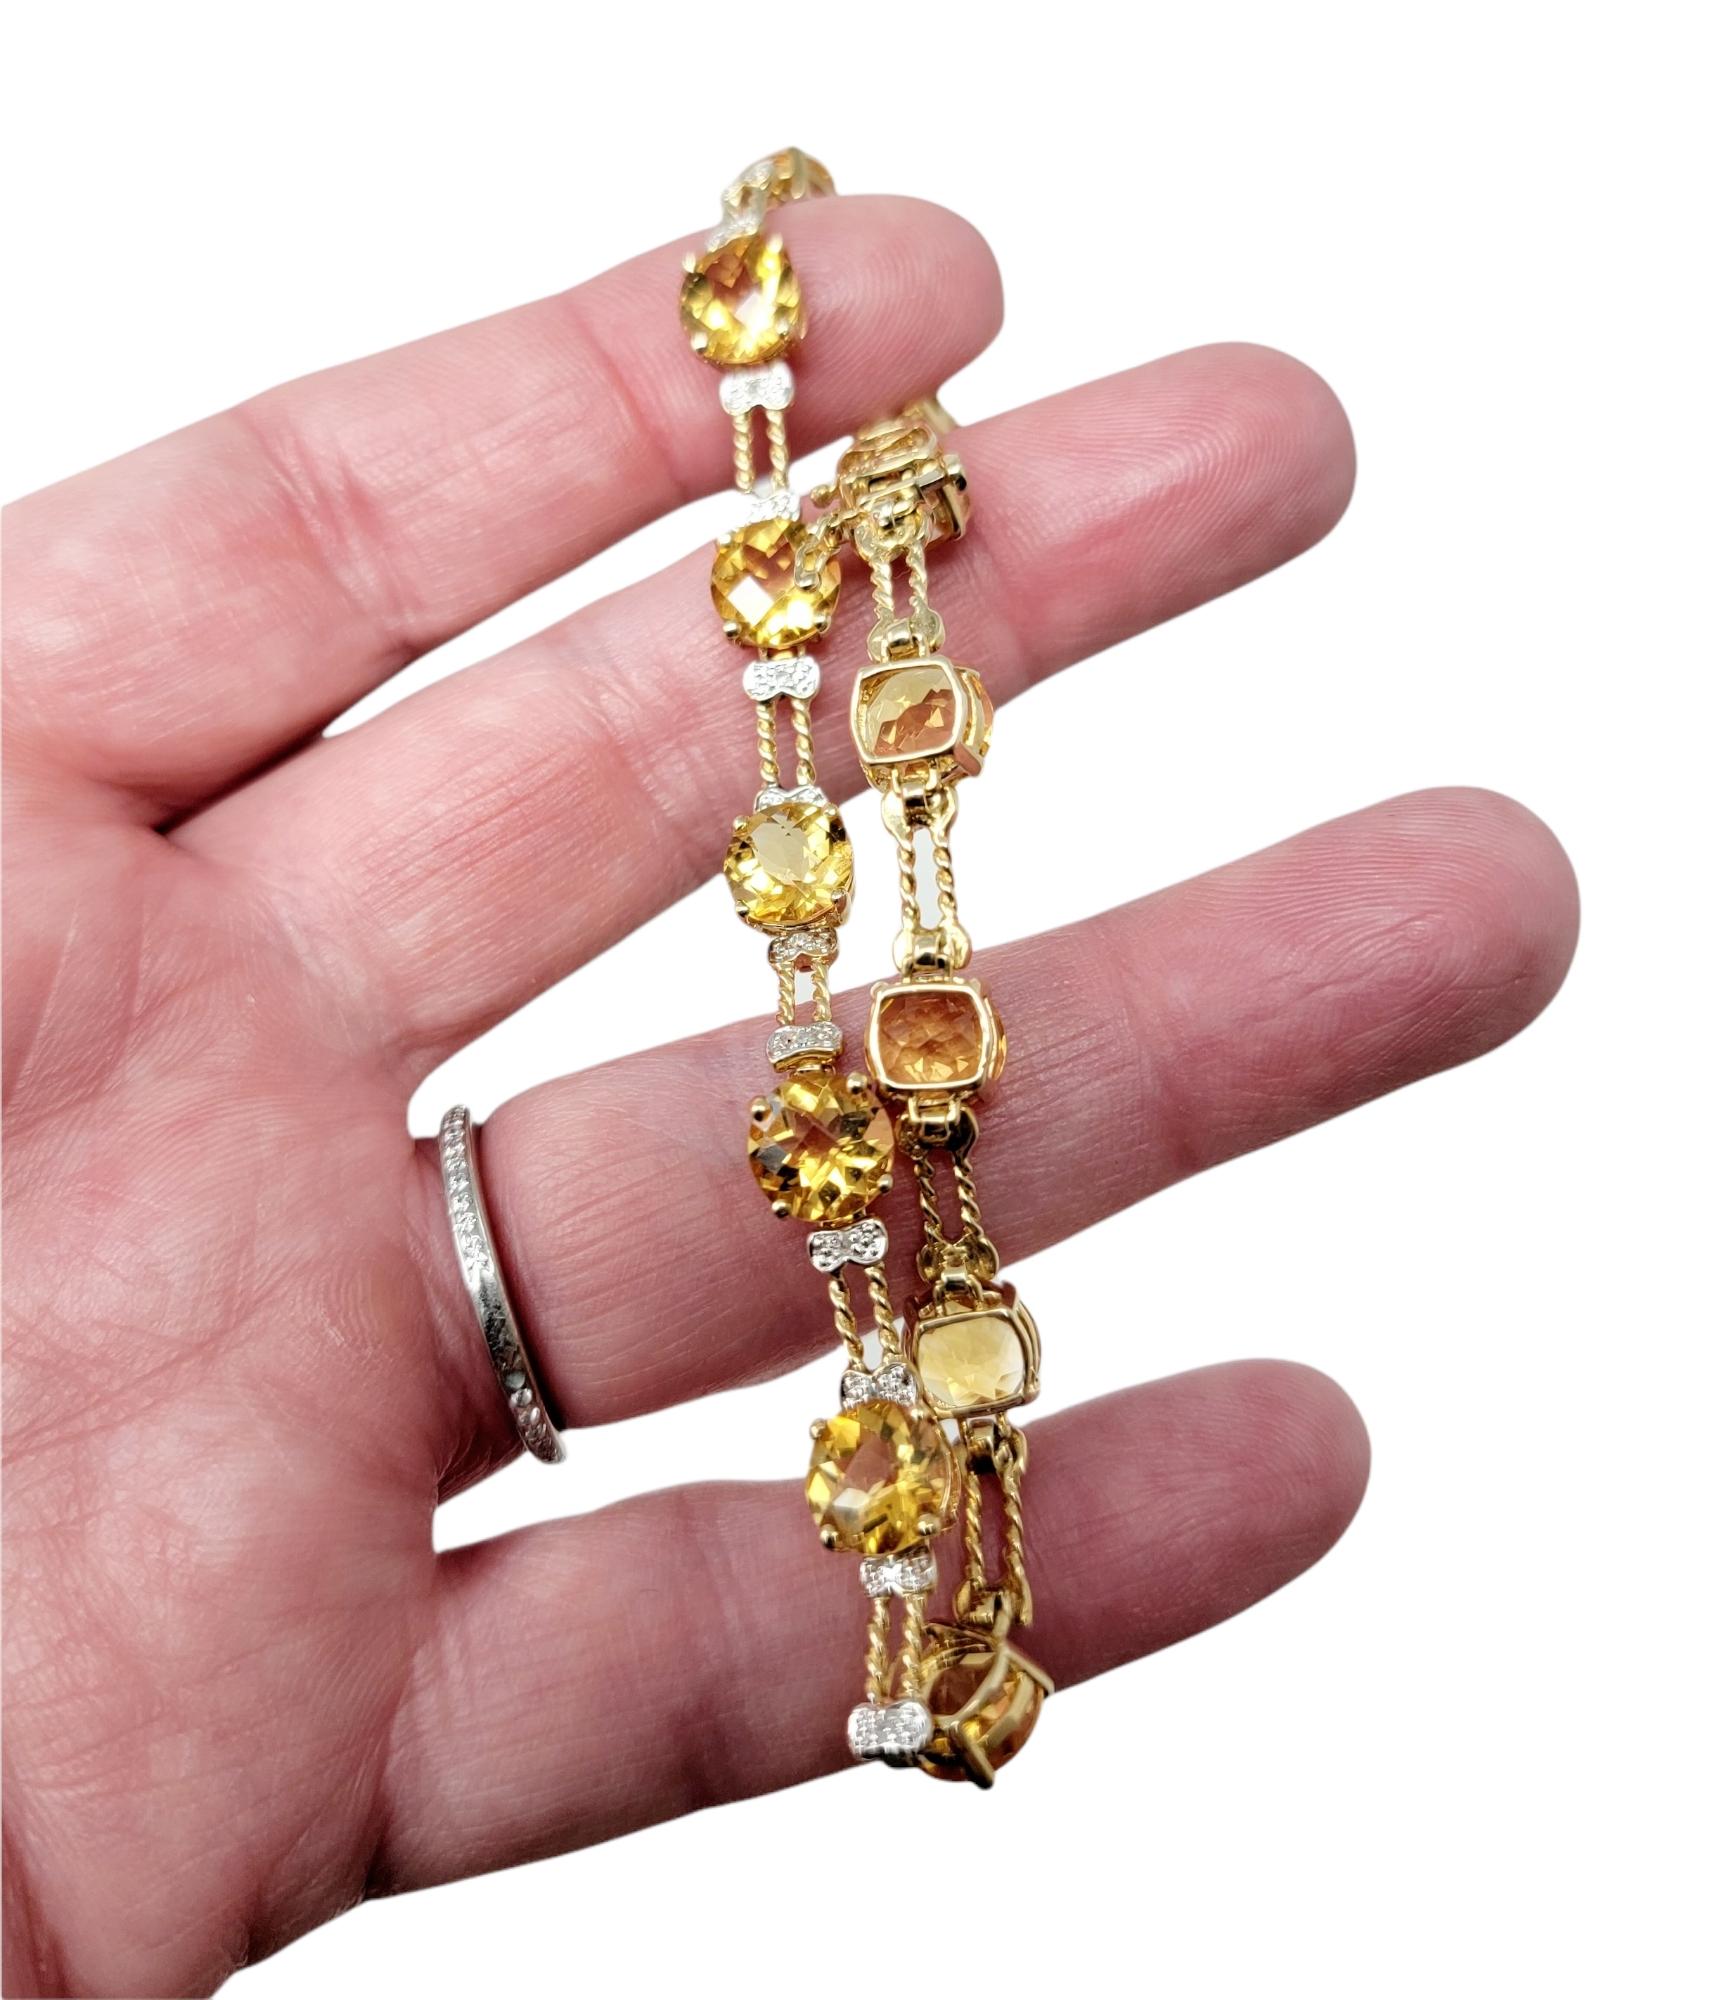 12.72 Carats Round Mixed Cut Citrine and Diamond Line Bracelet in 10 Karat Gold For Sale 3